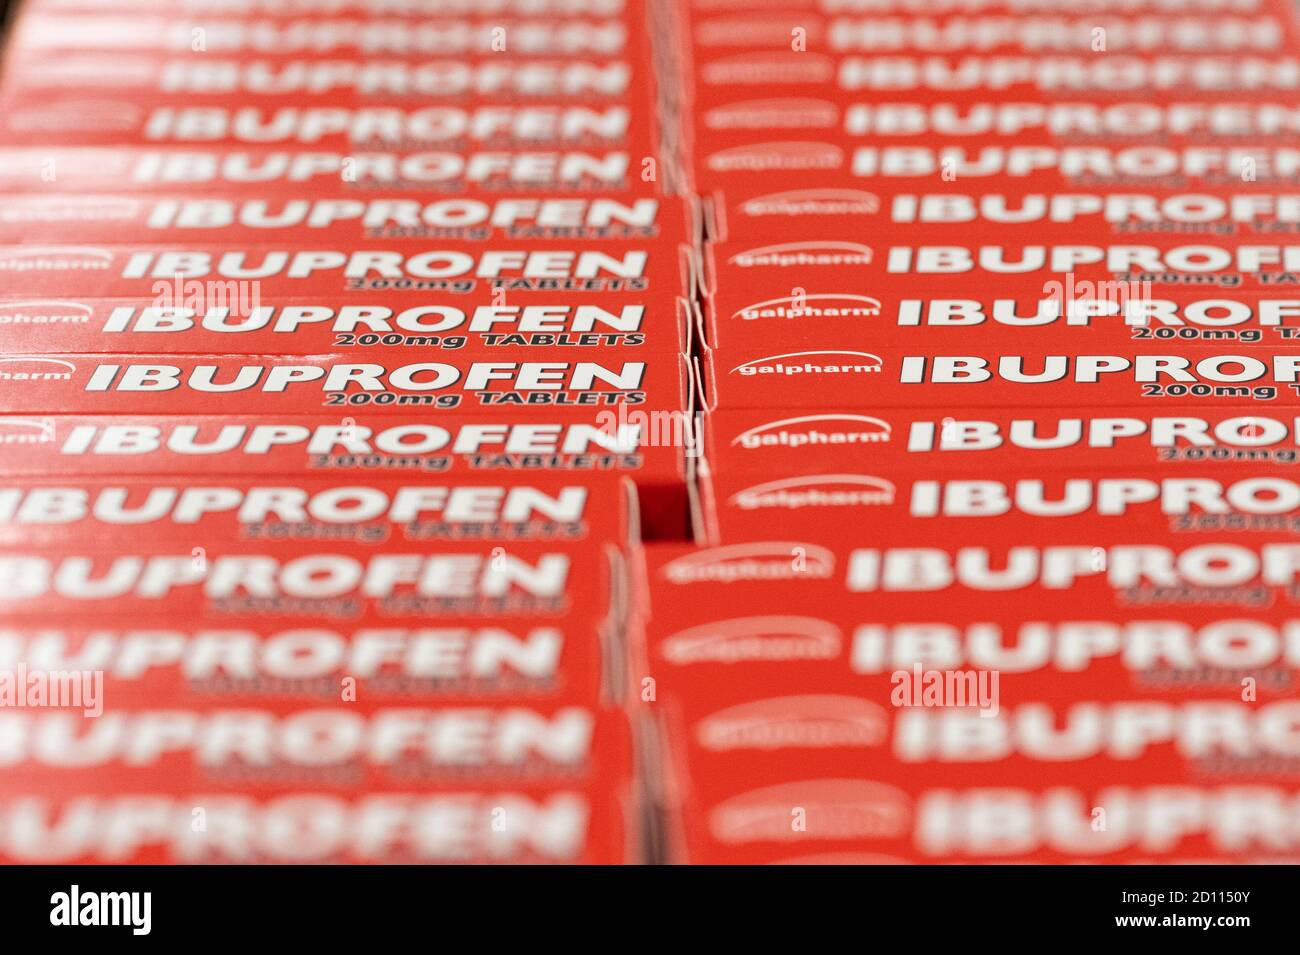 Packets of Ibuprofen on sale on a shelf in a supermarket in Cardiff, Wales, United Kingdom. Stock Photo